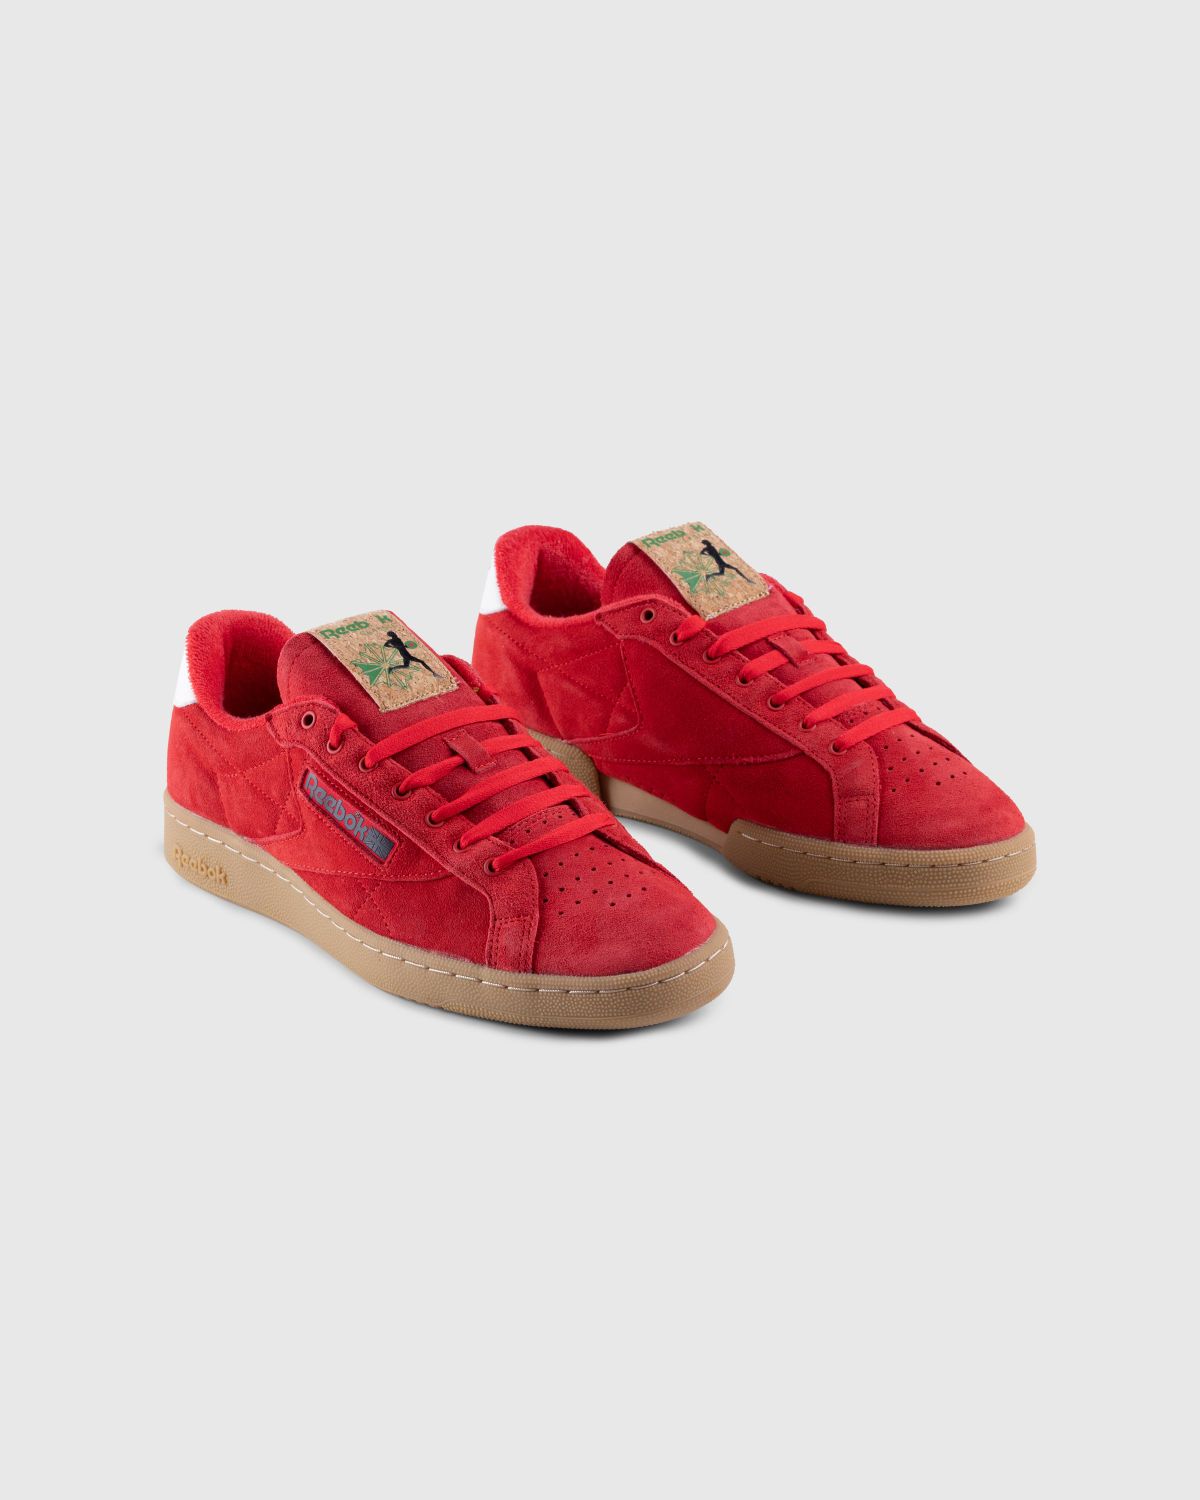 Reebok – Club C Grounds Red - Sneakers - Red - Image 3